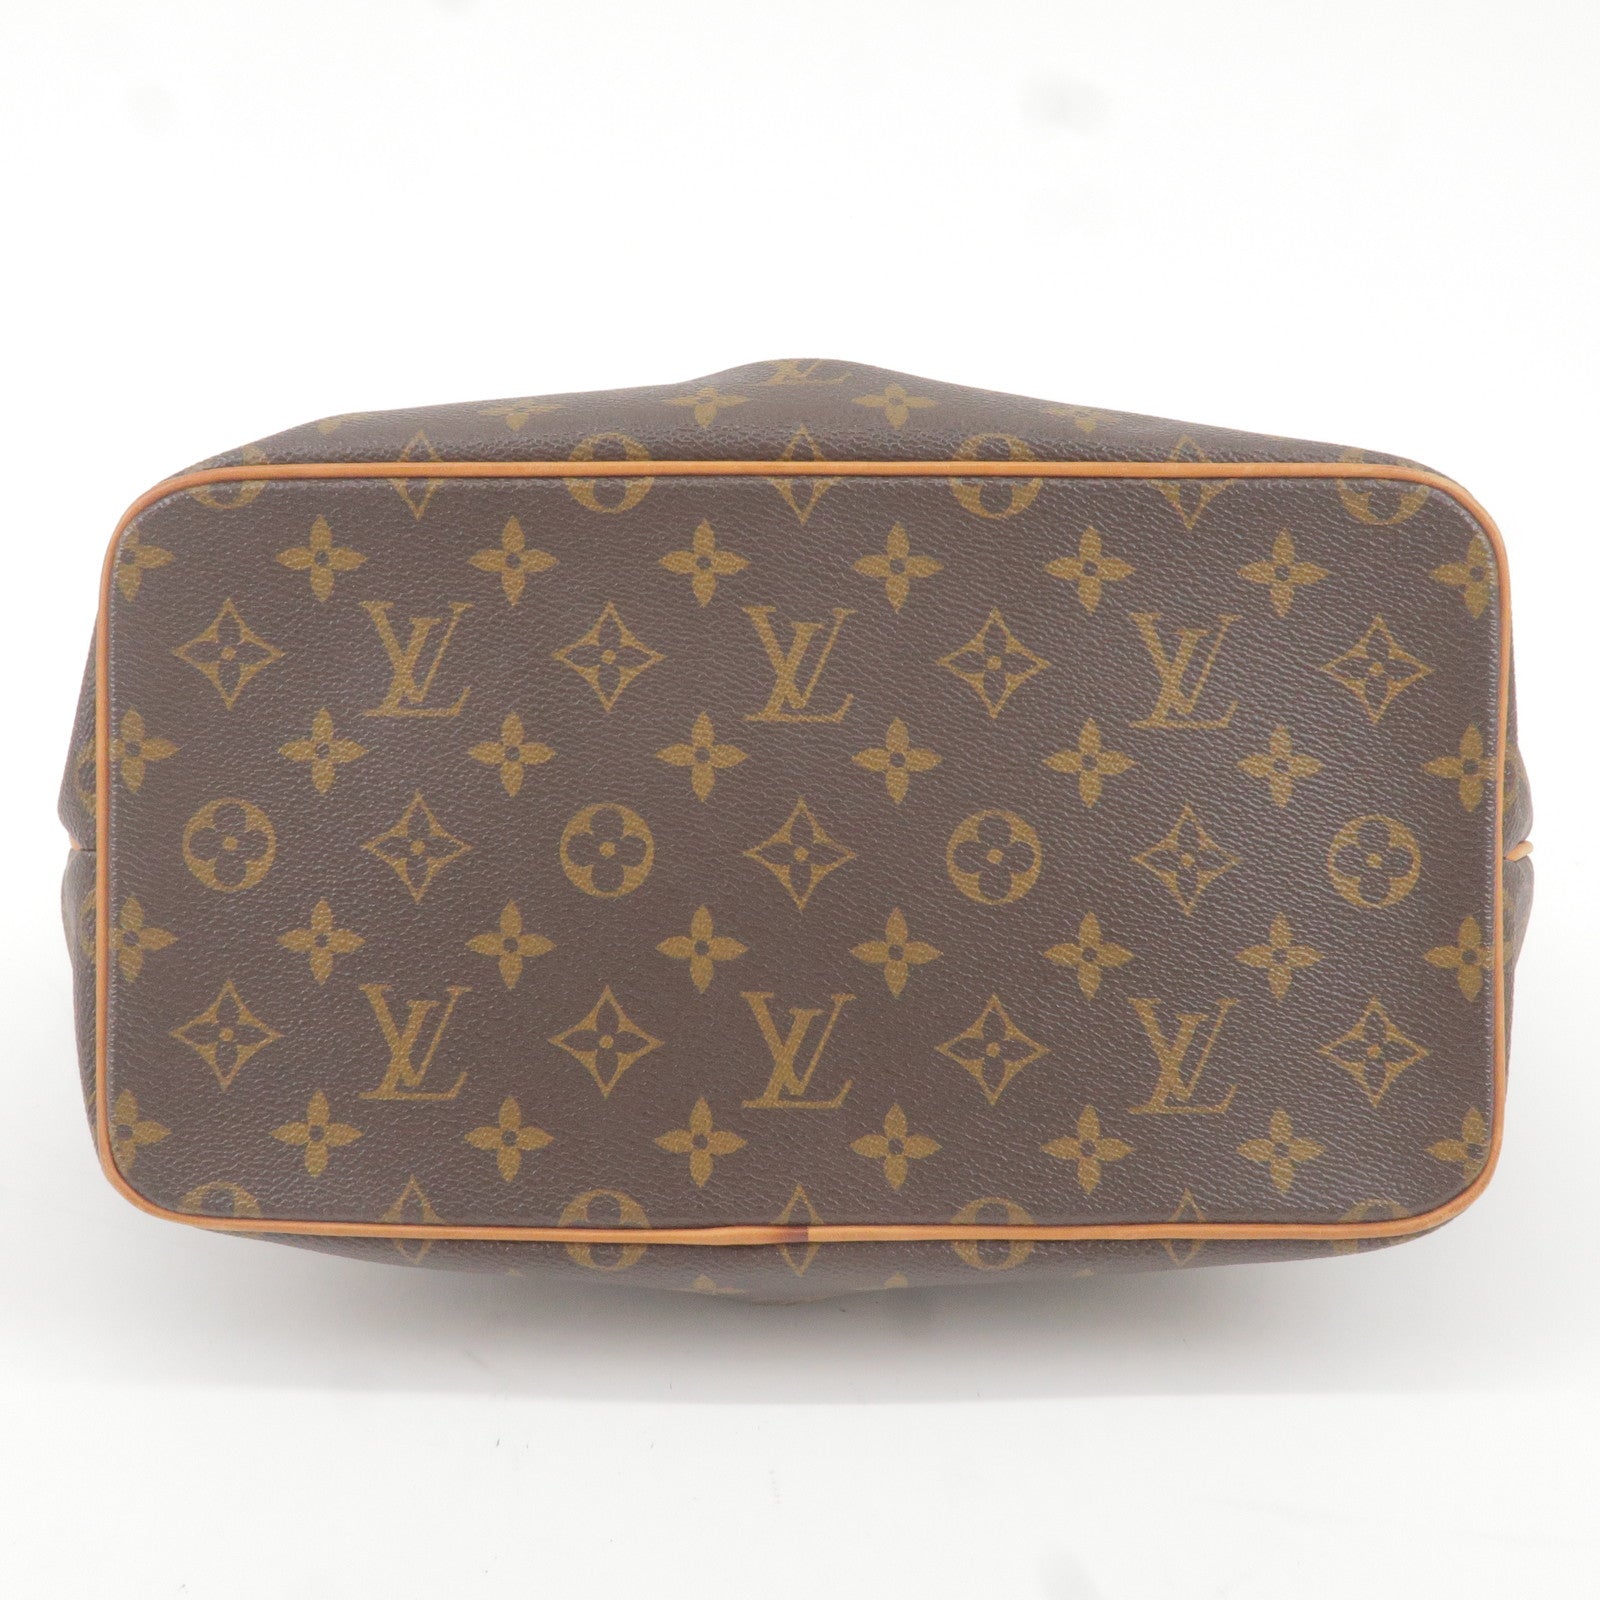 SOLD Was FOR SALE Louis Vuitton Authentic Neverfull Sprouse